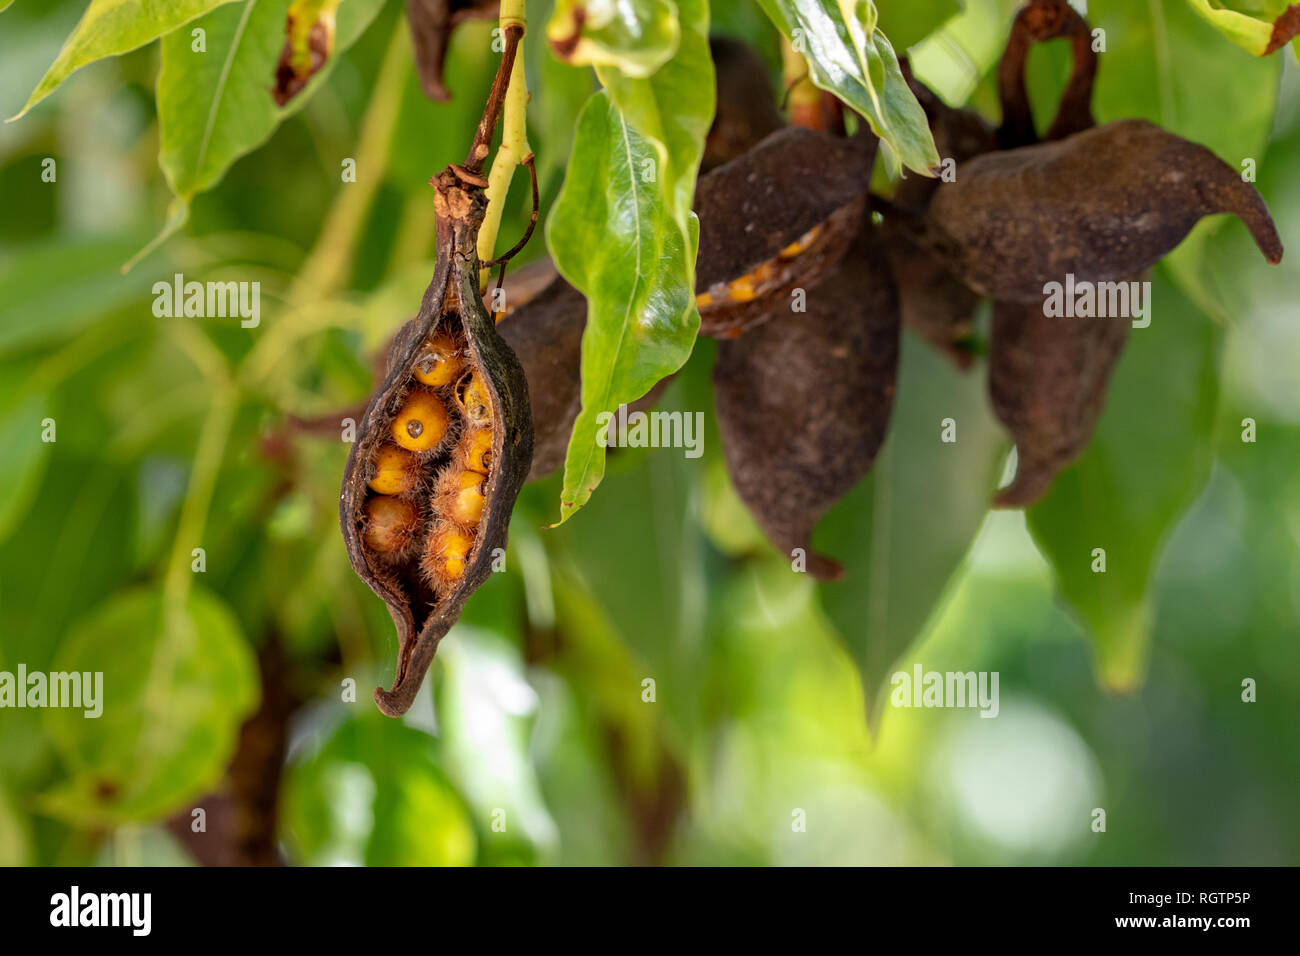 Seed pods from the Kurrajong or Bottle tree (Brachychiton populneus) Stock Photo